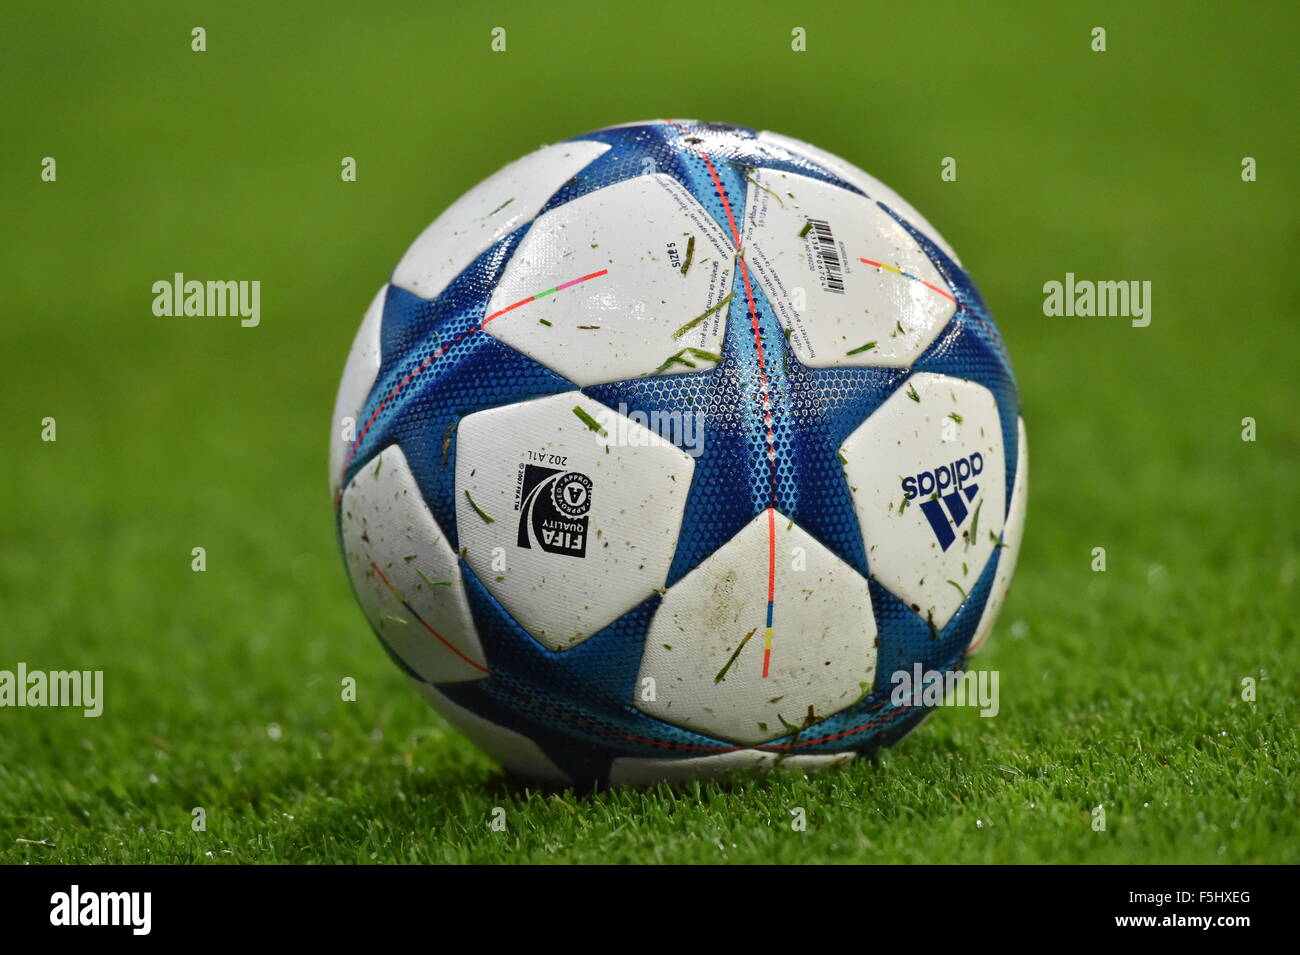 Munich, Germany. 4th Nov, 2015. A view of the ADIDAS soccer ball on the  pitch during the Champions League group F soccer match Bayern Munich vs FC  Arsenal in Munich, Germany, 4